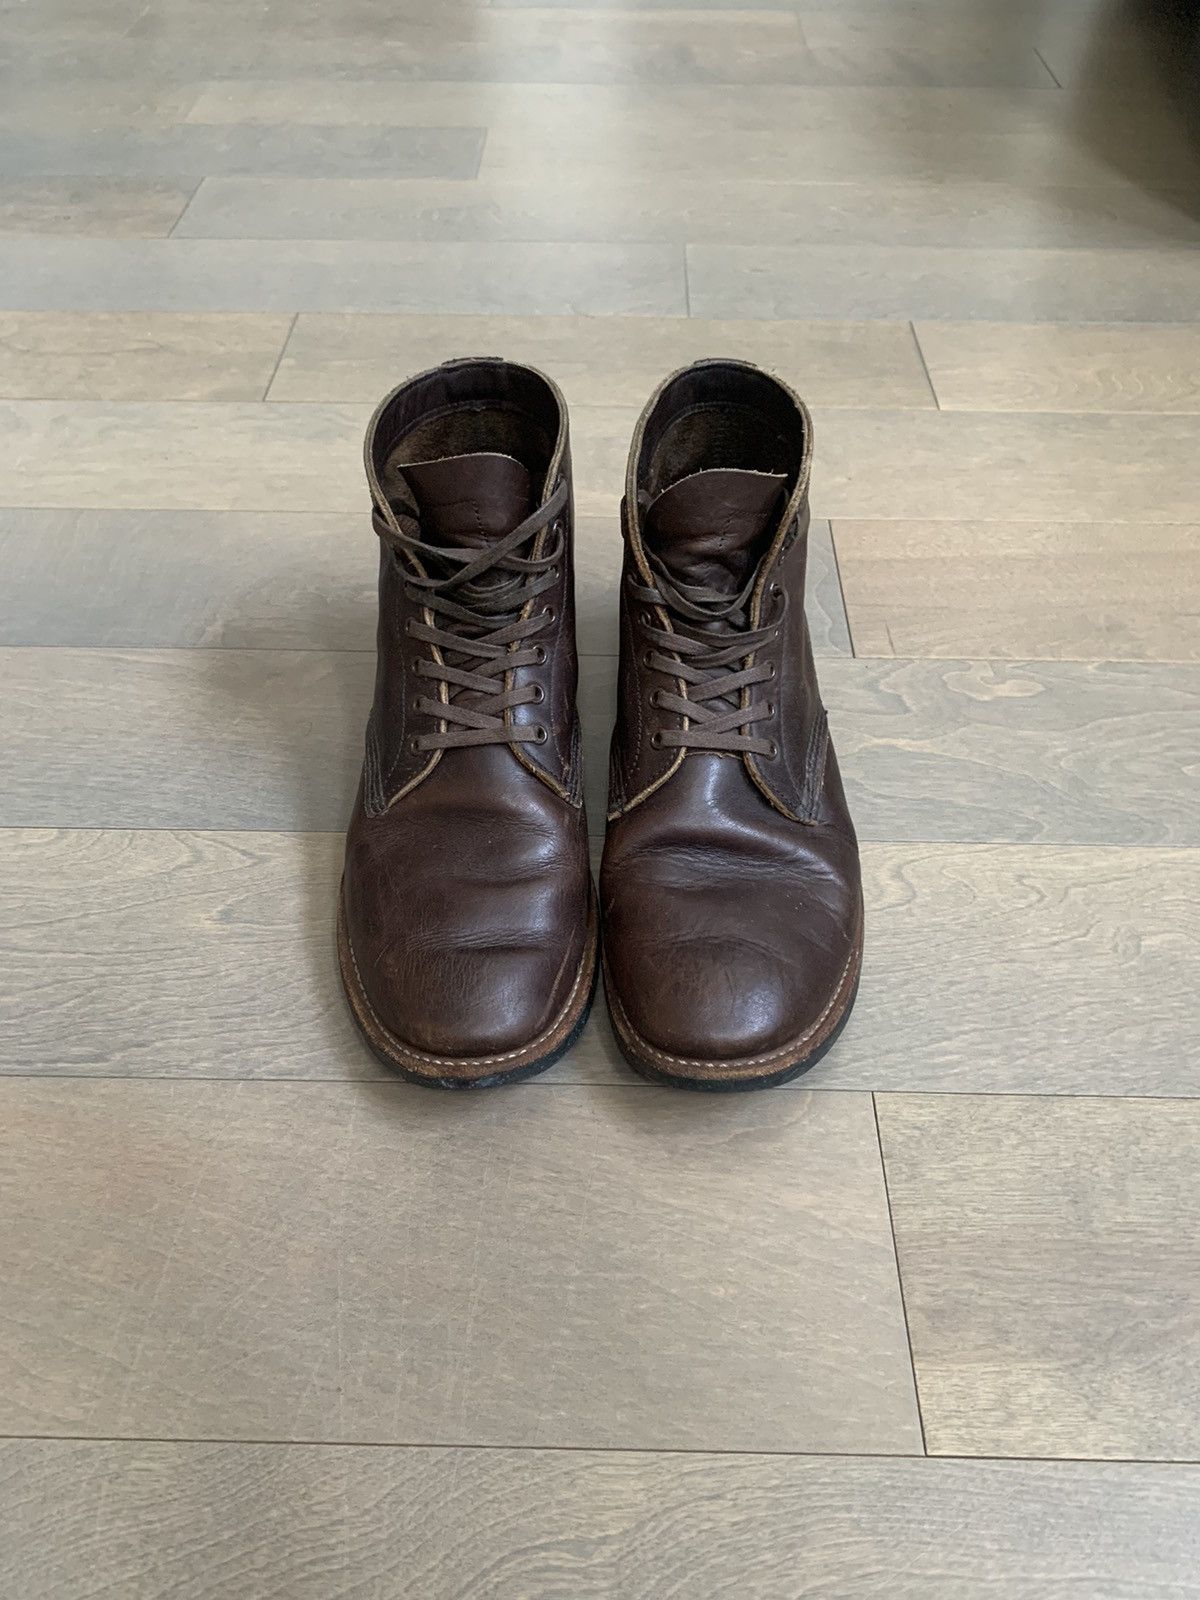 Red Wing Red wing heritage merchant boot 8061 | Grailed